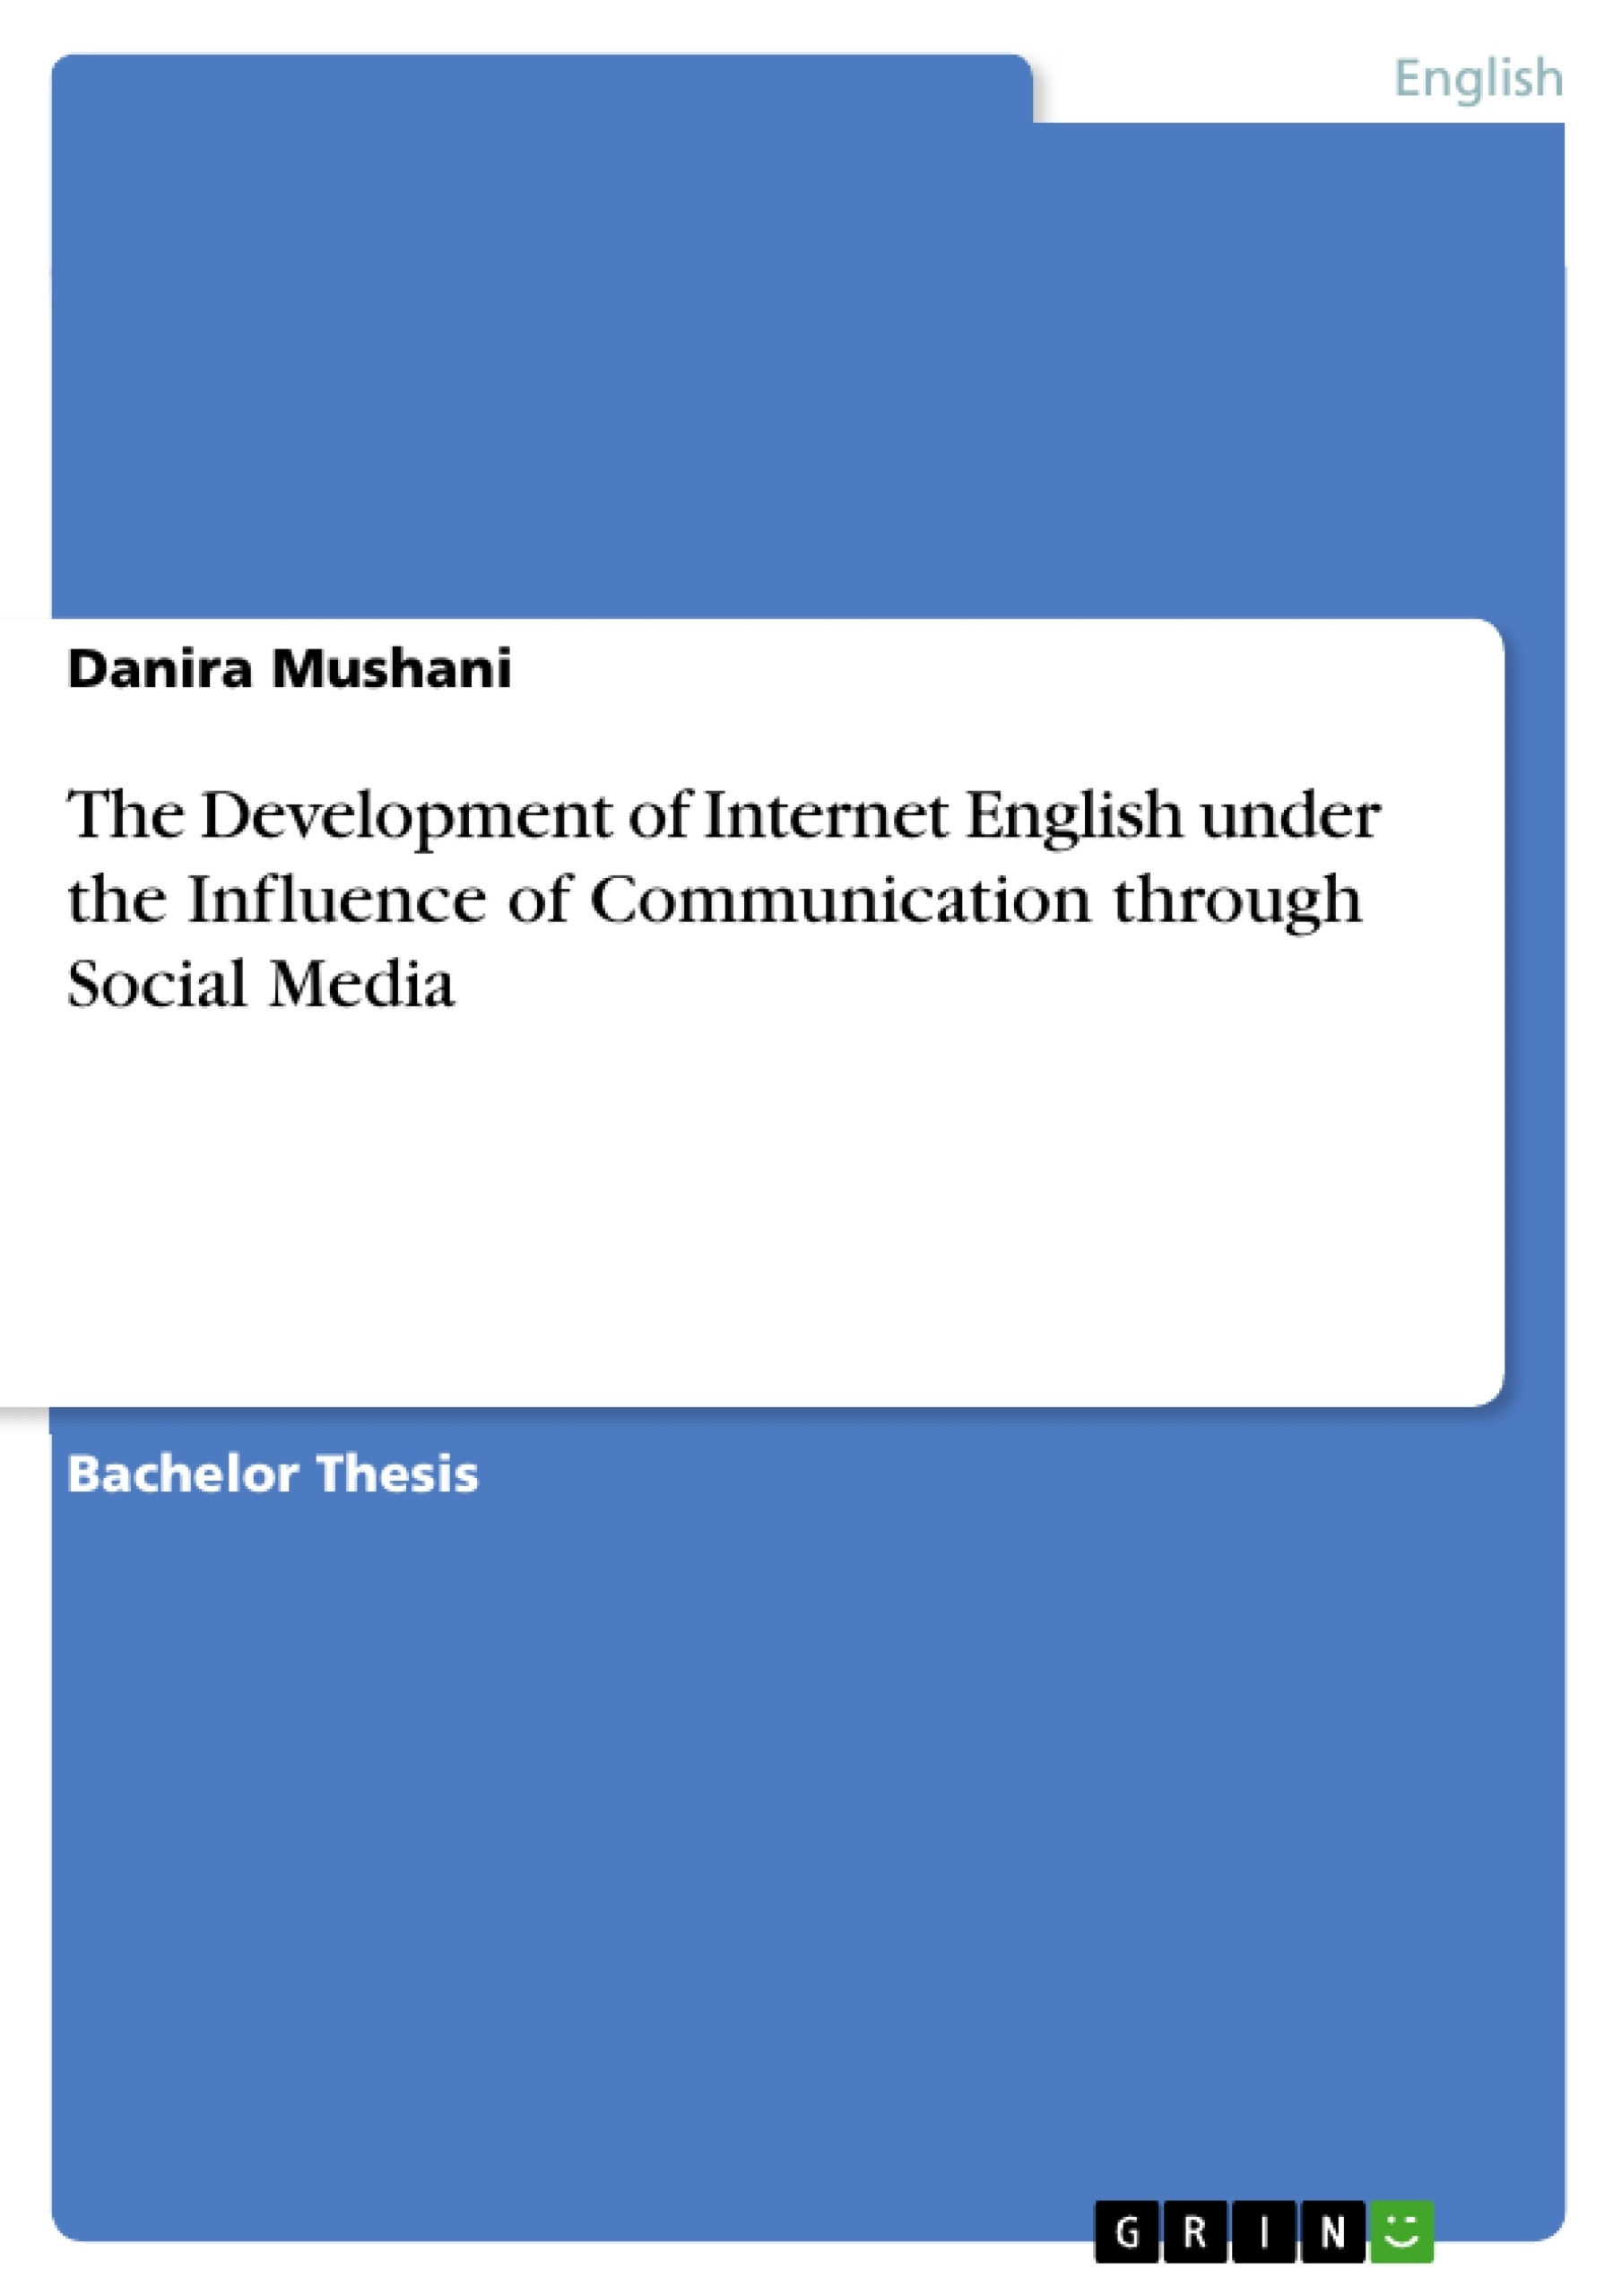 Title: The Development of Internet English under the Influence of Communication through Social Media